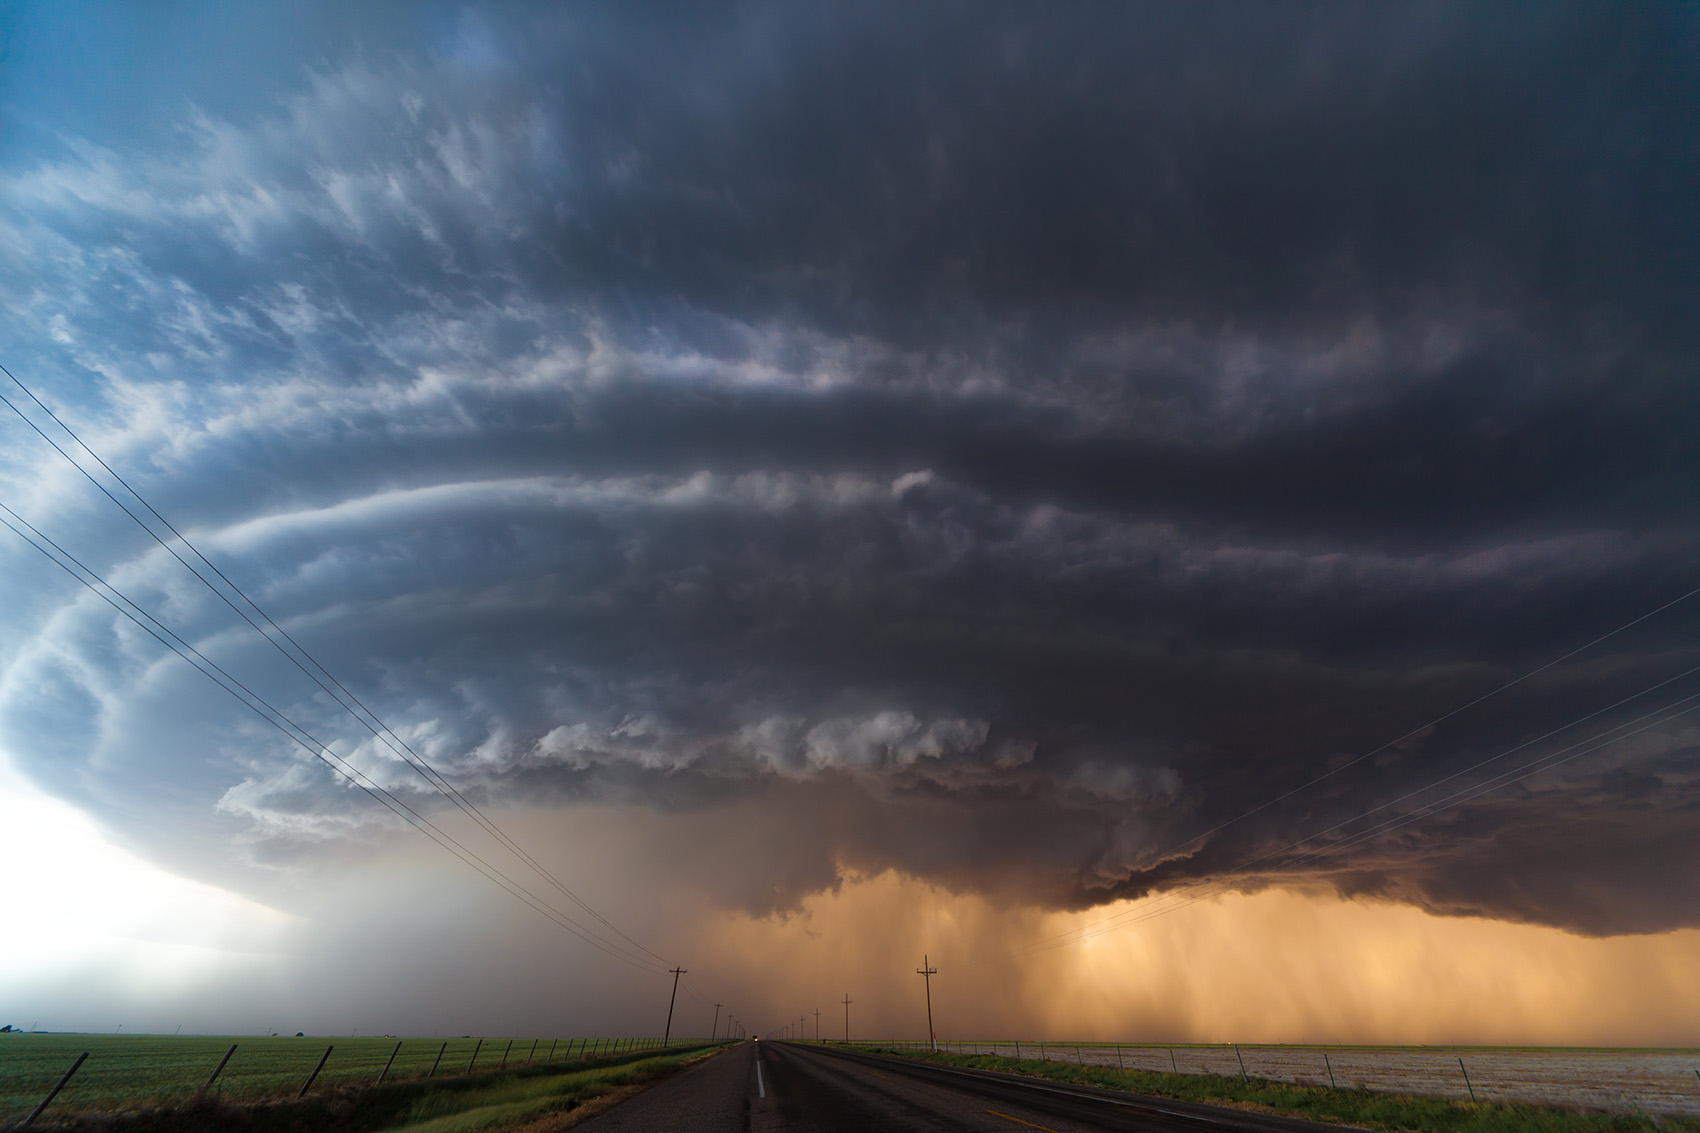 Supercell thunderstorm in the American Plains.